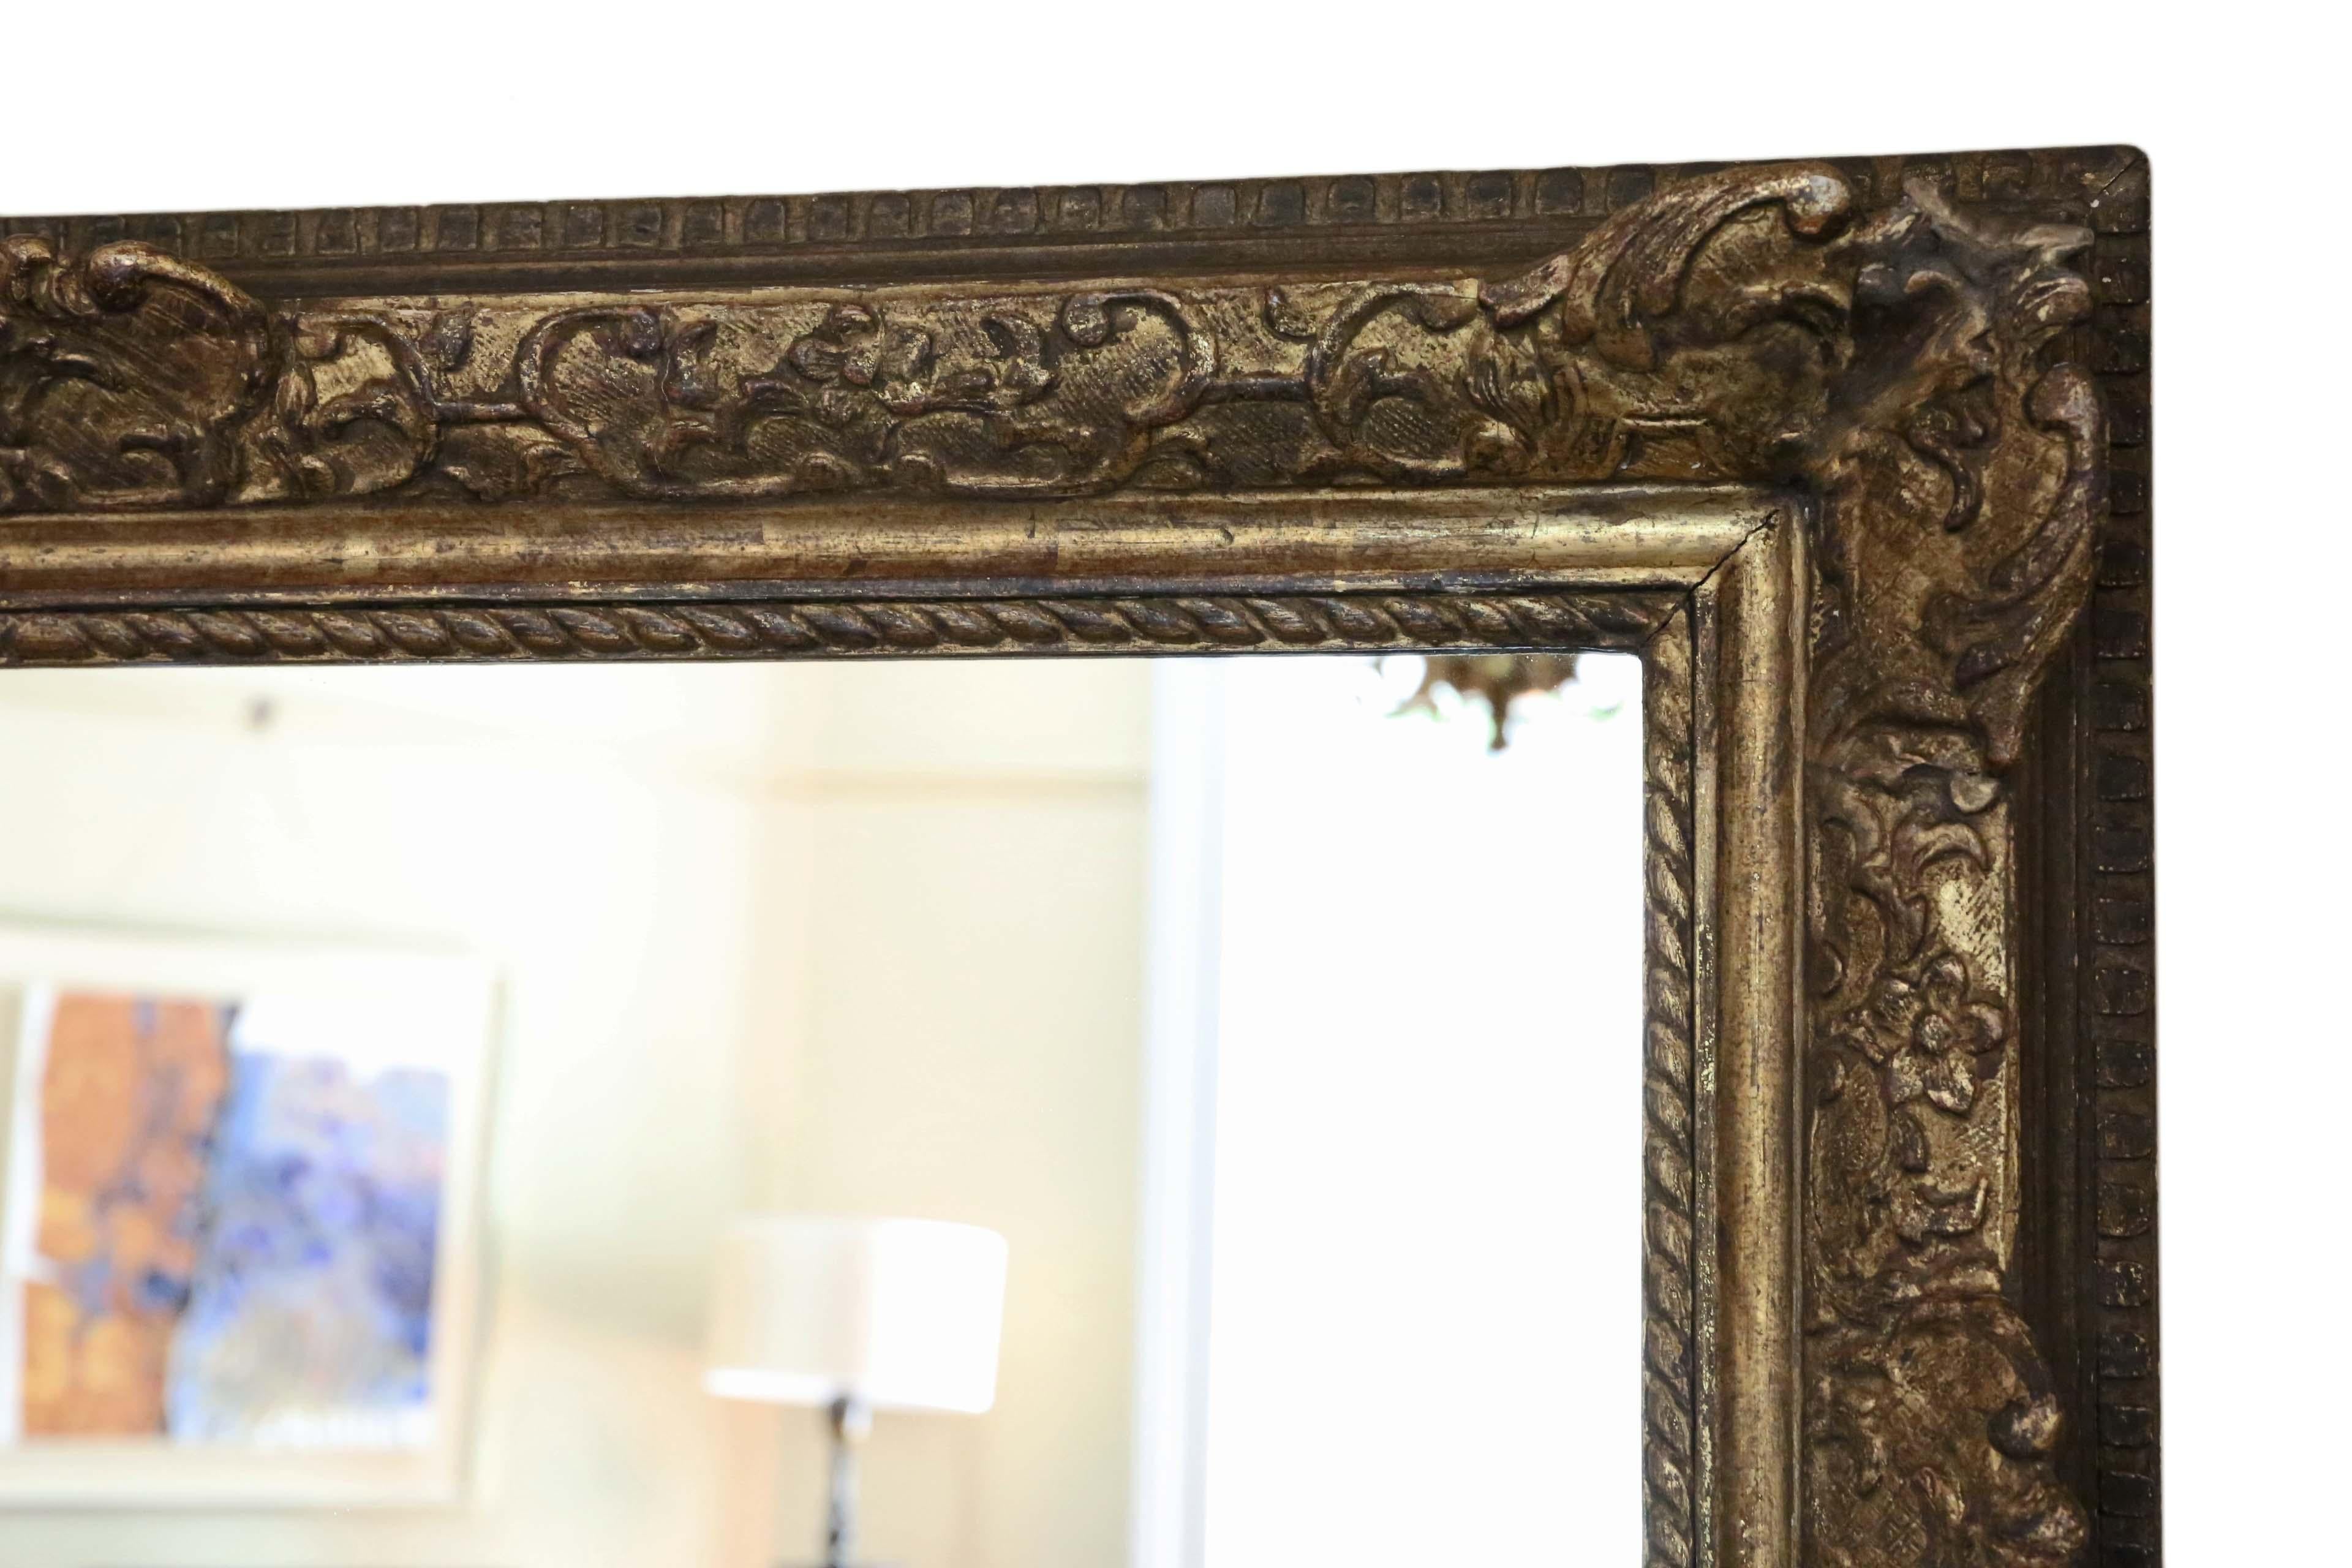 Antique 19th Century Large Gilt Overmantel Wall Mirror In Good Condition For Sale In Wisbech, Cambridgeshire